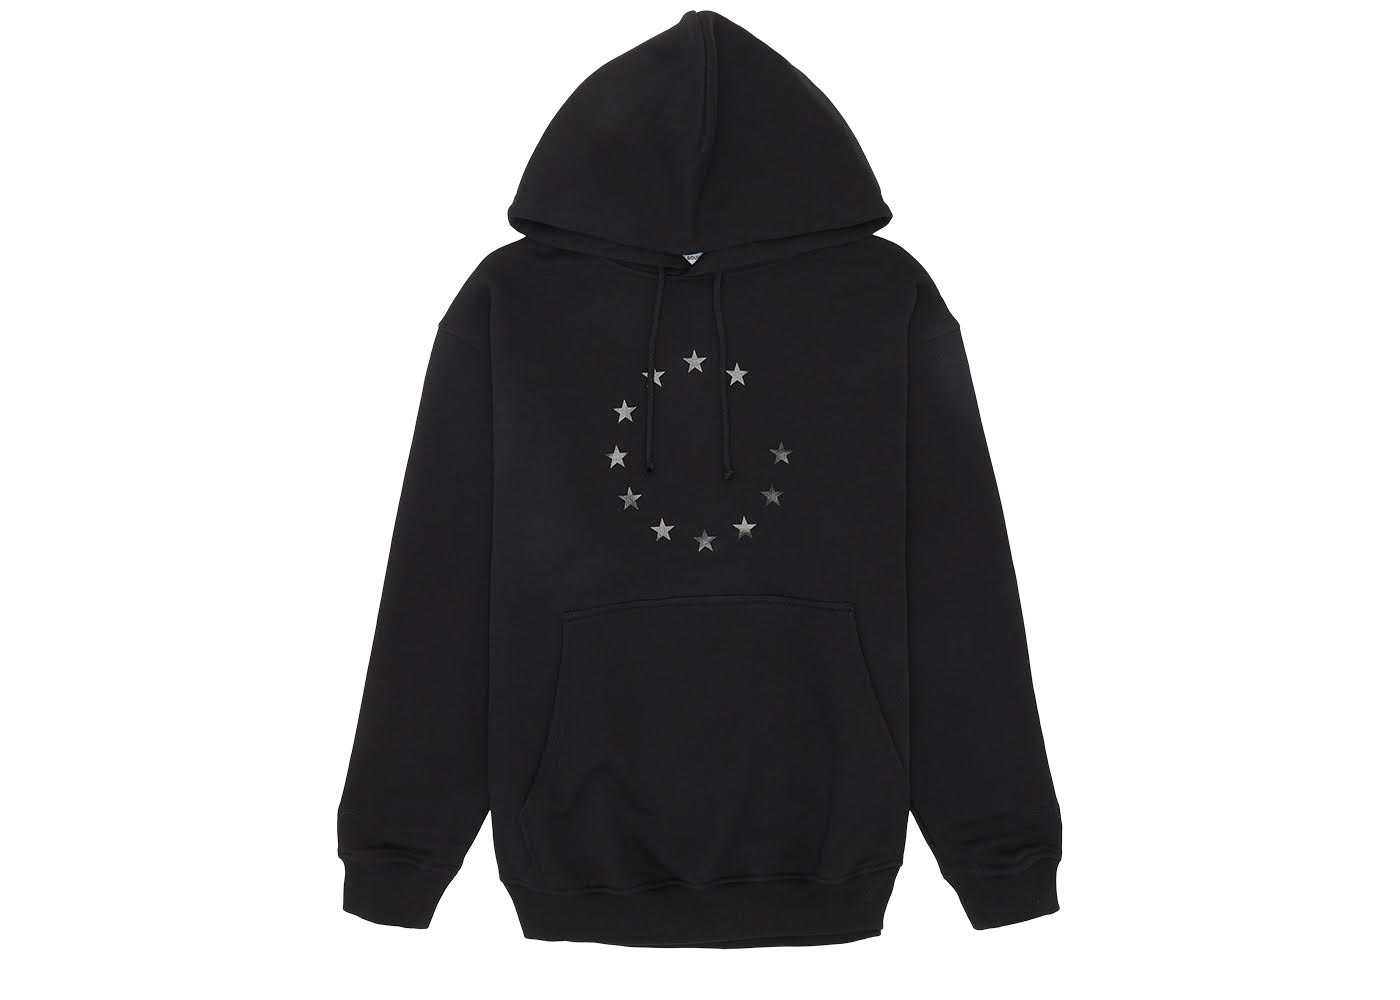 Souvenir Official EUNIFY SPECIAL DropX Hoodie Black メンズ - SS21 - JP